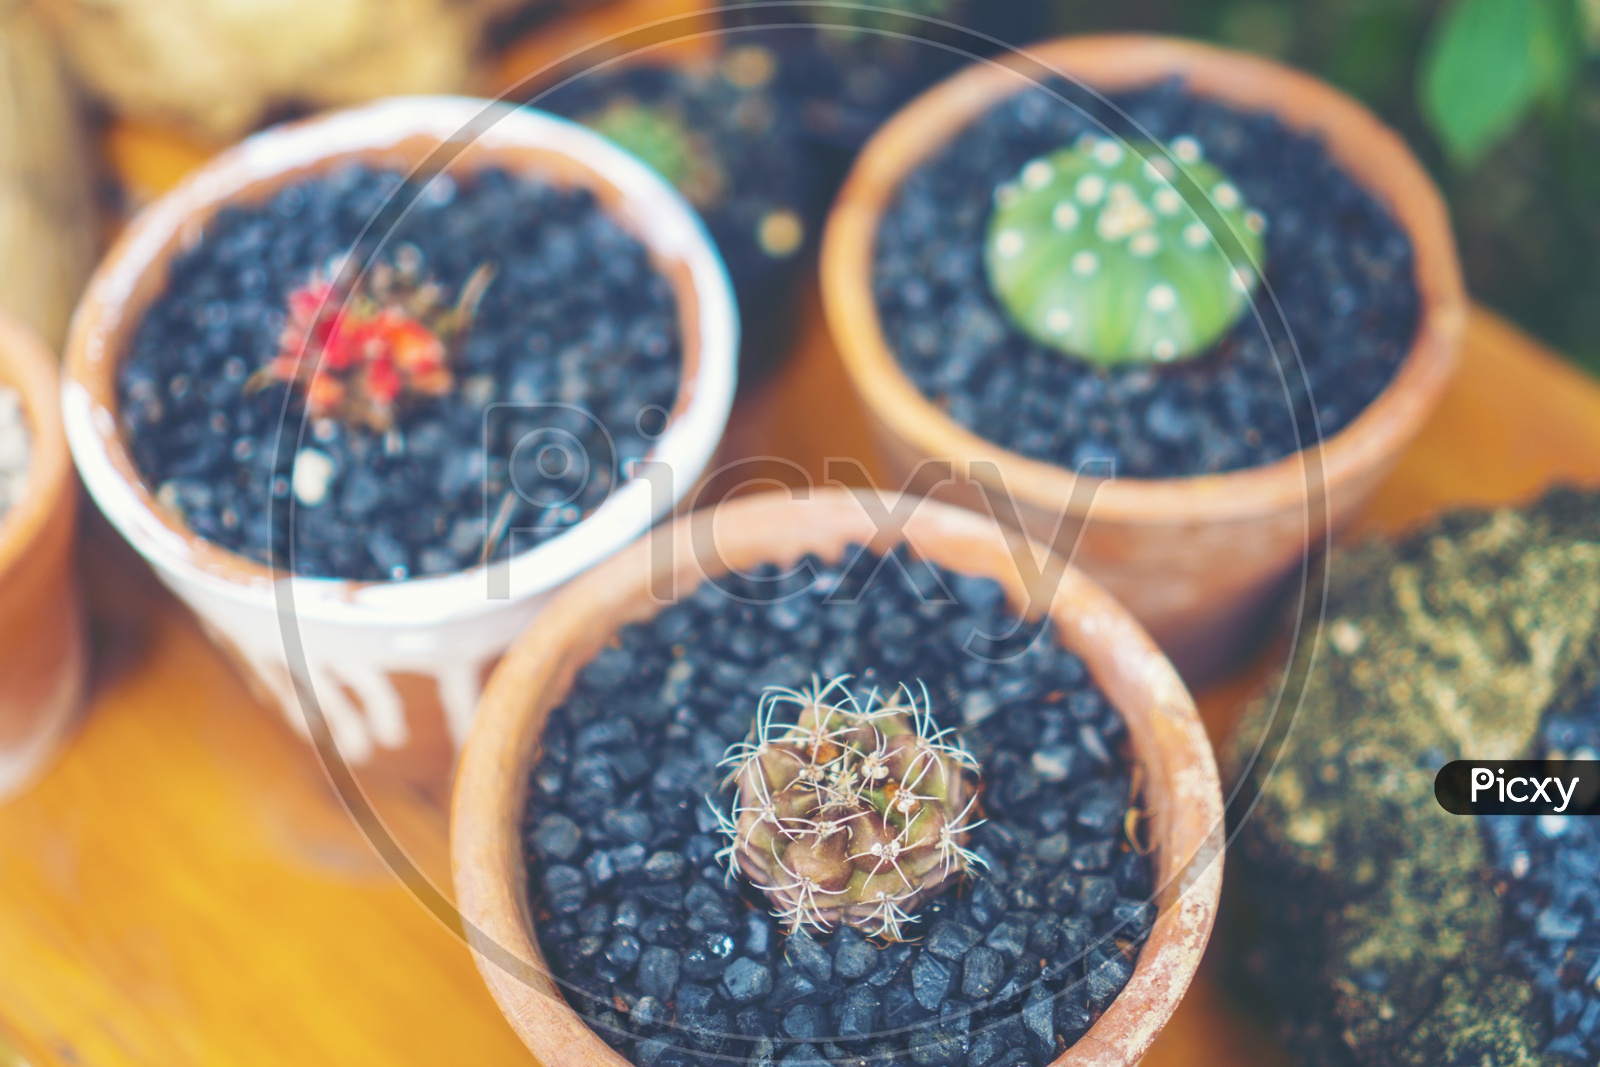 Cactus Plants Growing  in  Pot Closeup With Vintage Filter